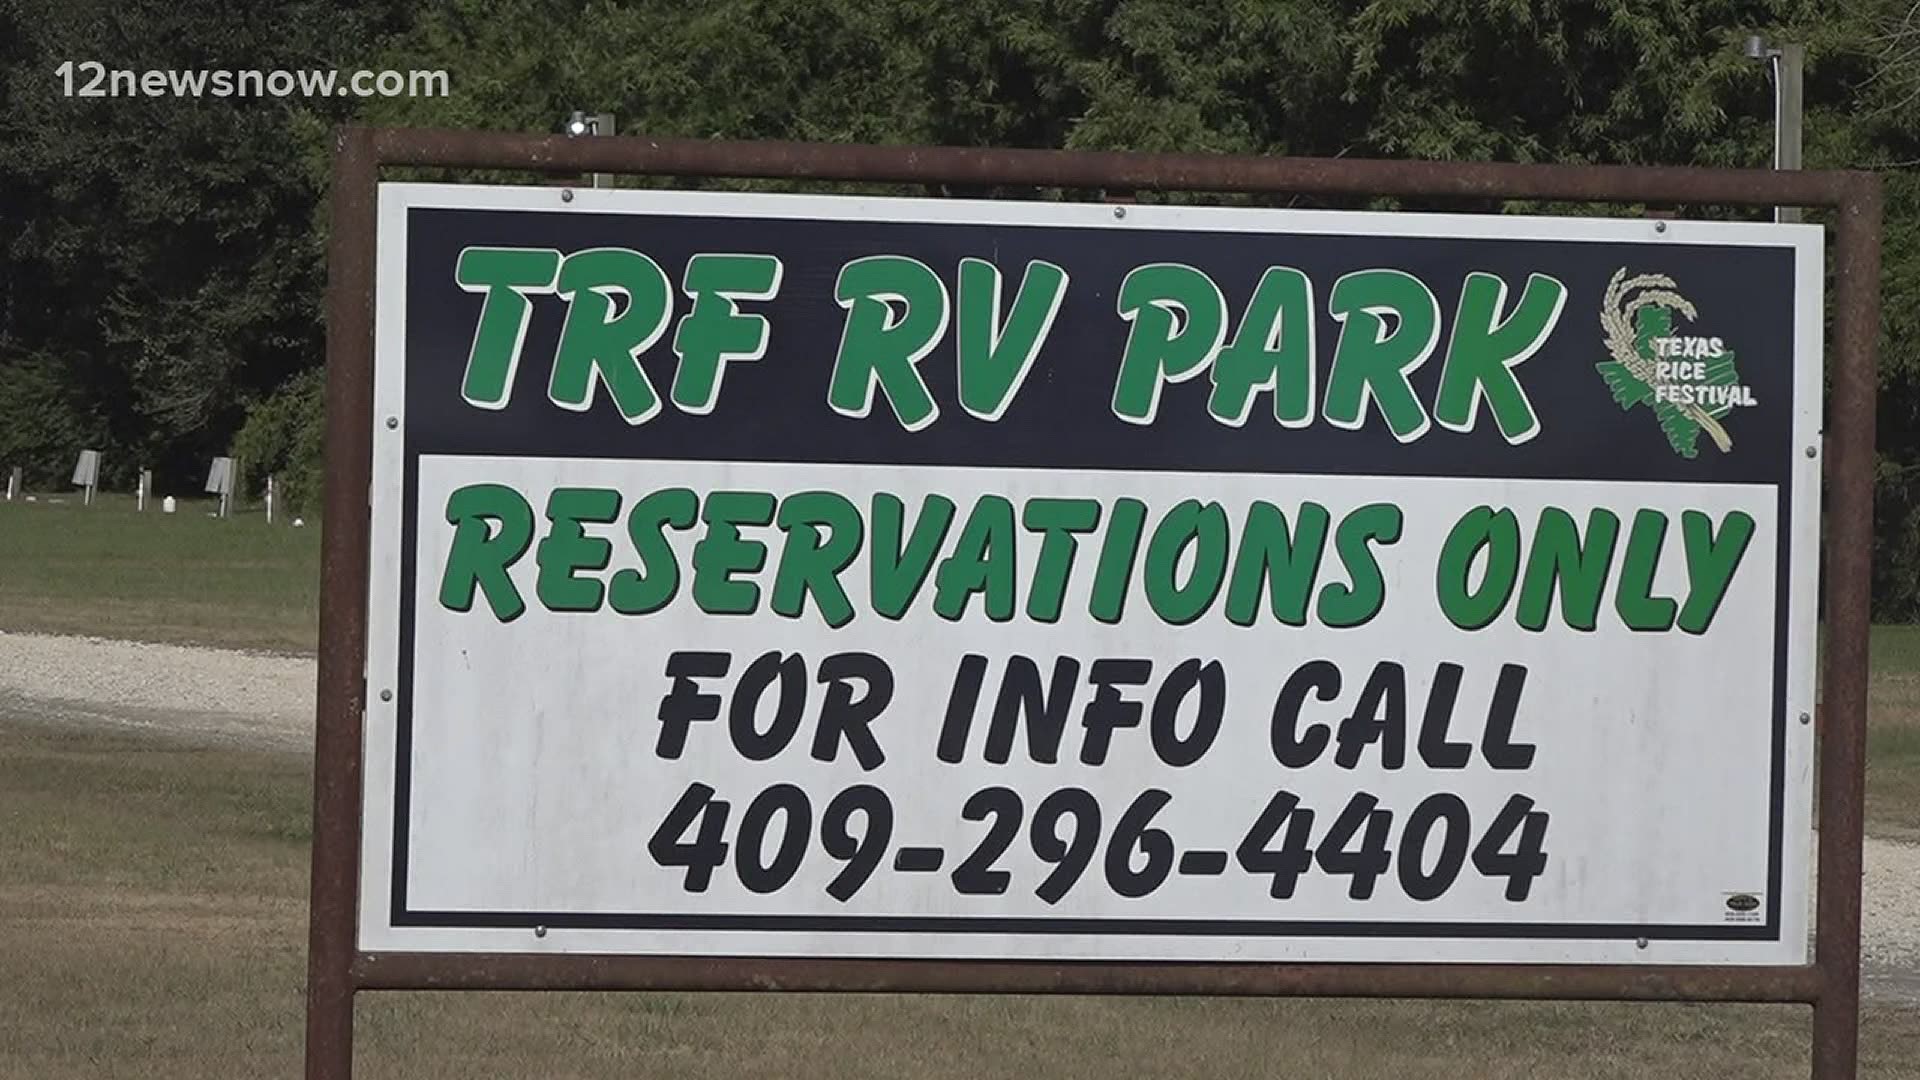 A nearly five hour stand off ended in tragedy after a man took his own life Tuesday in Winnie. The man lived in the Texas Rice Festival RV park with his father.